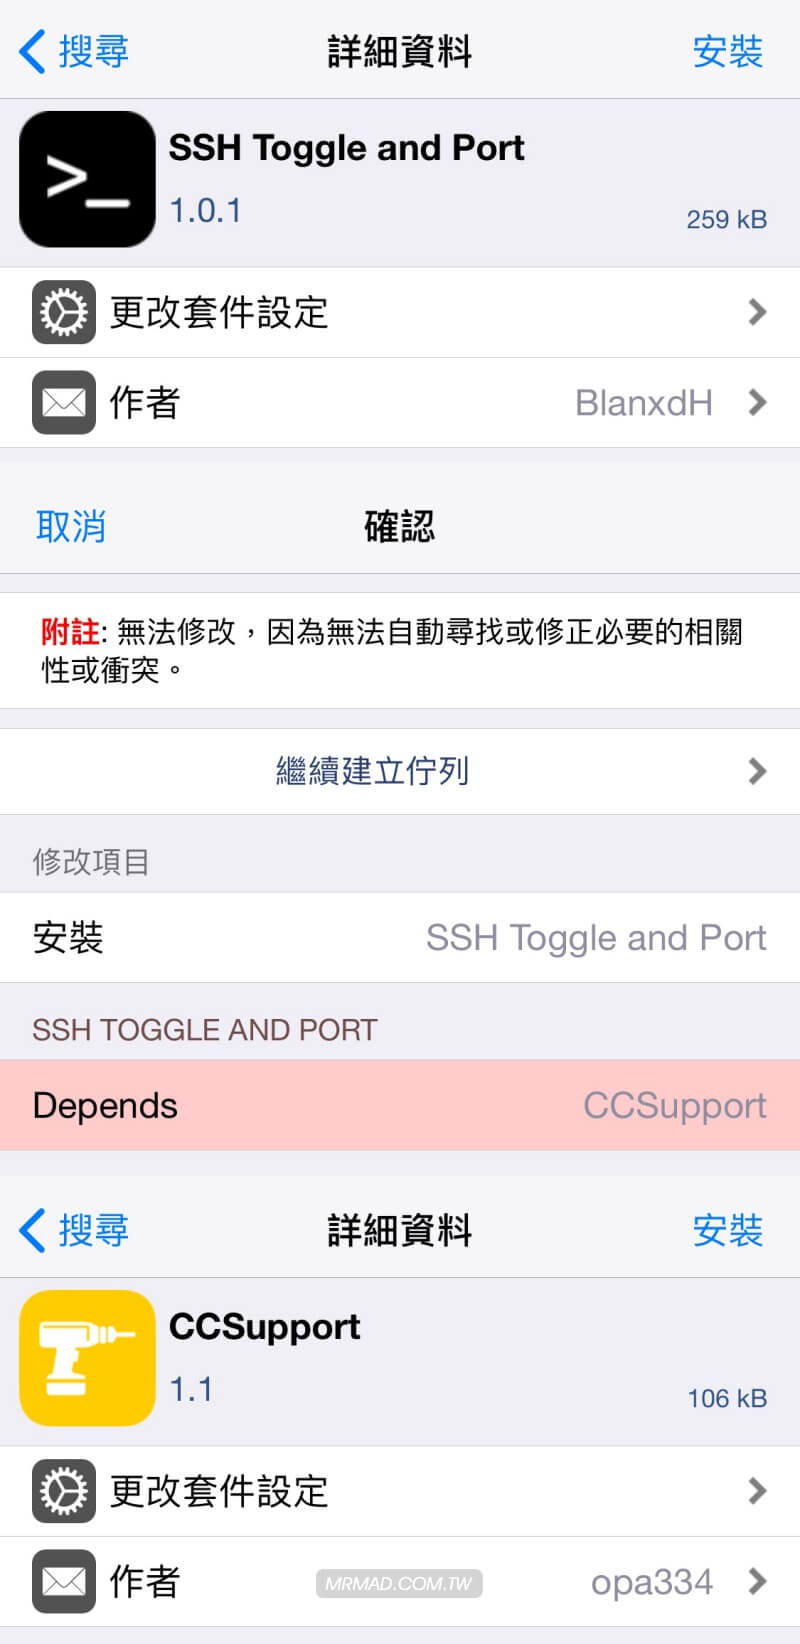 ssh toggle and port 3